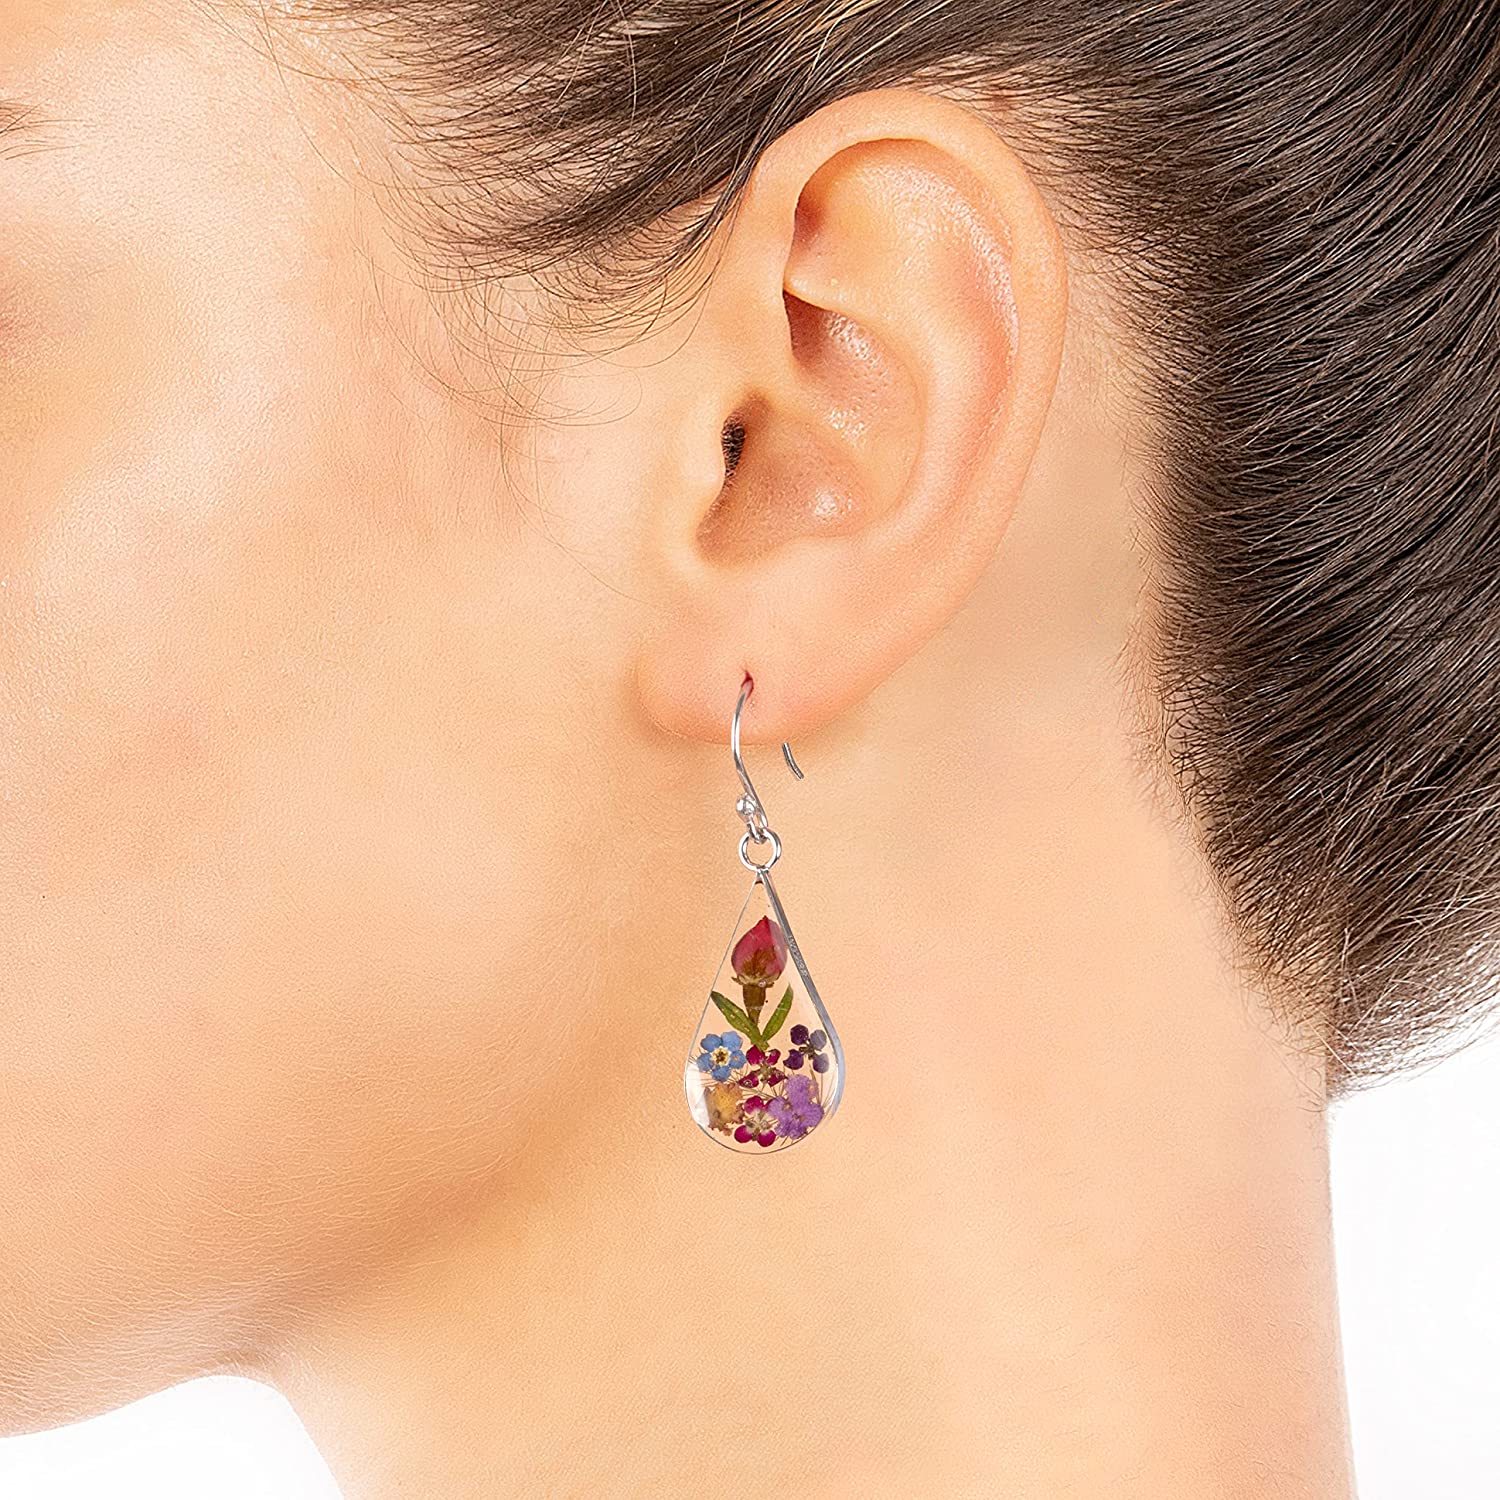 A woman is wearing an earring with real pressed flowers inside.